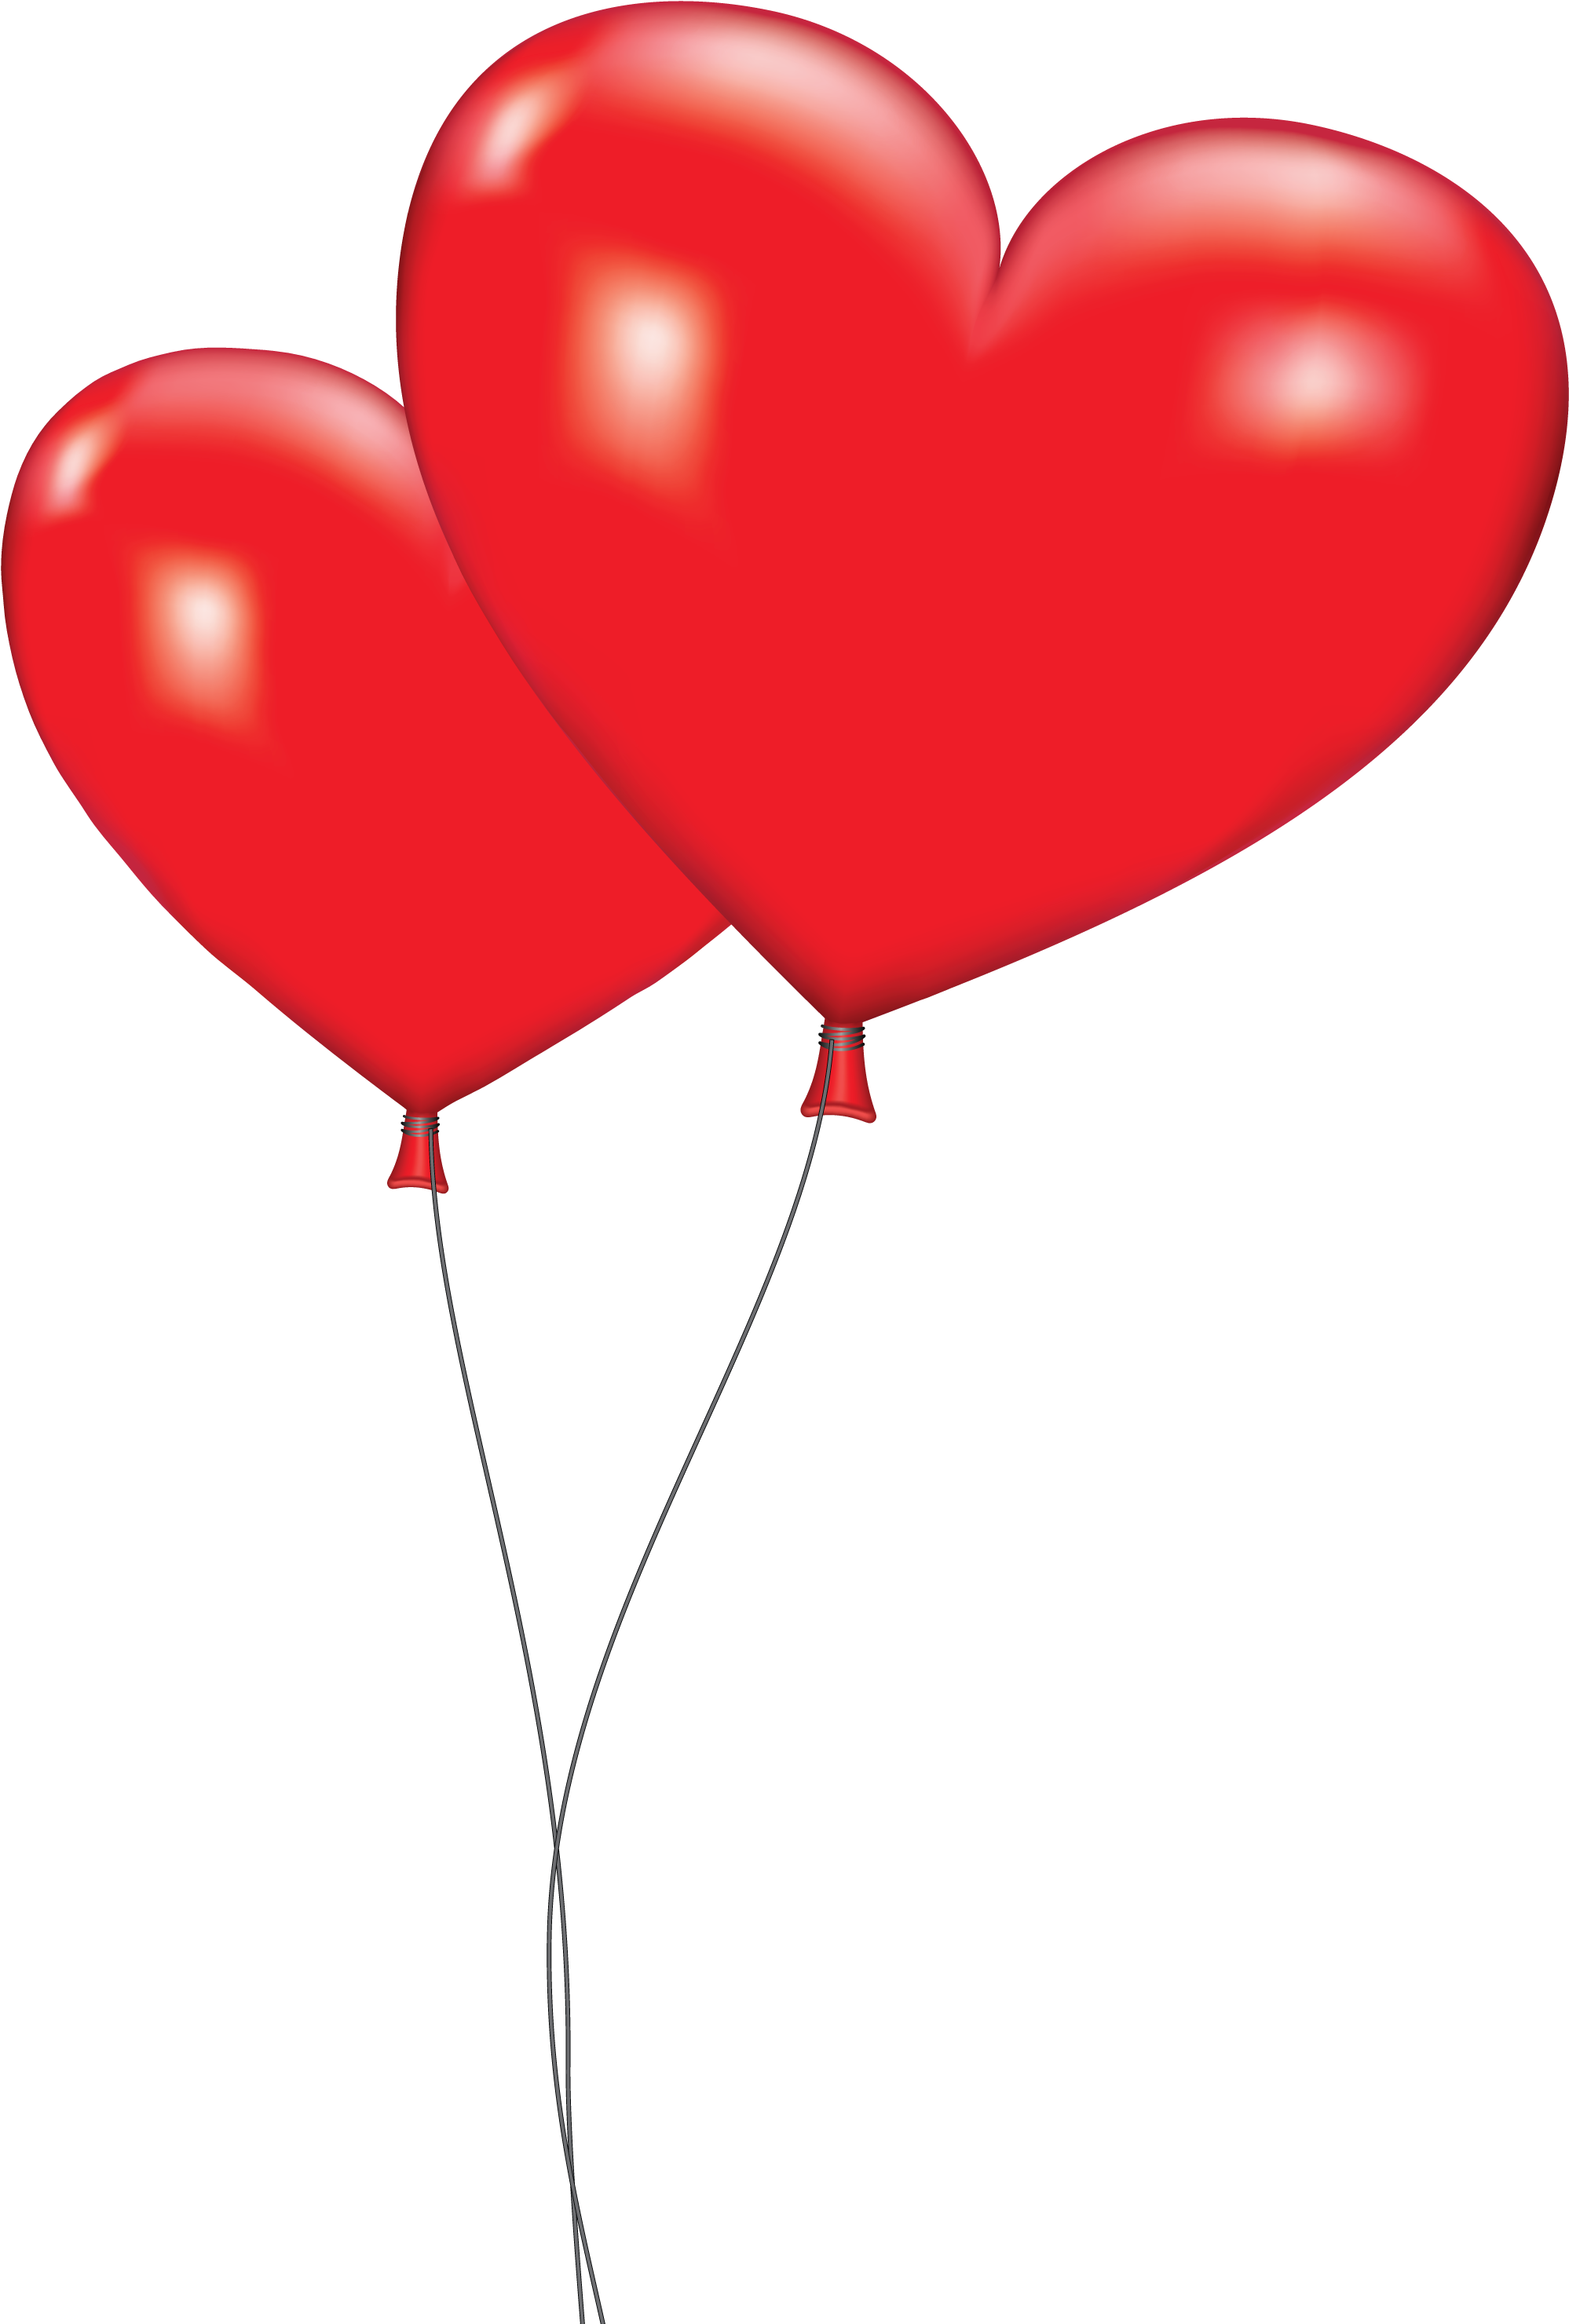 Heart Red Balloons PNG Image Background